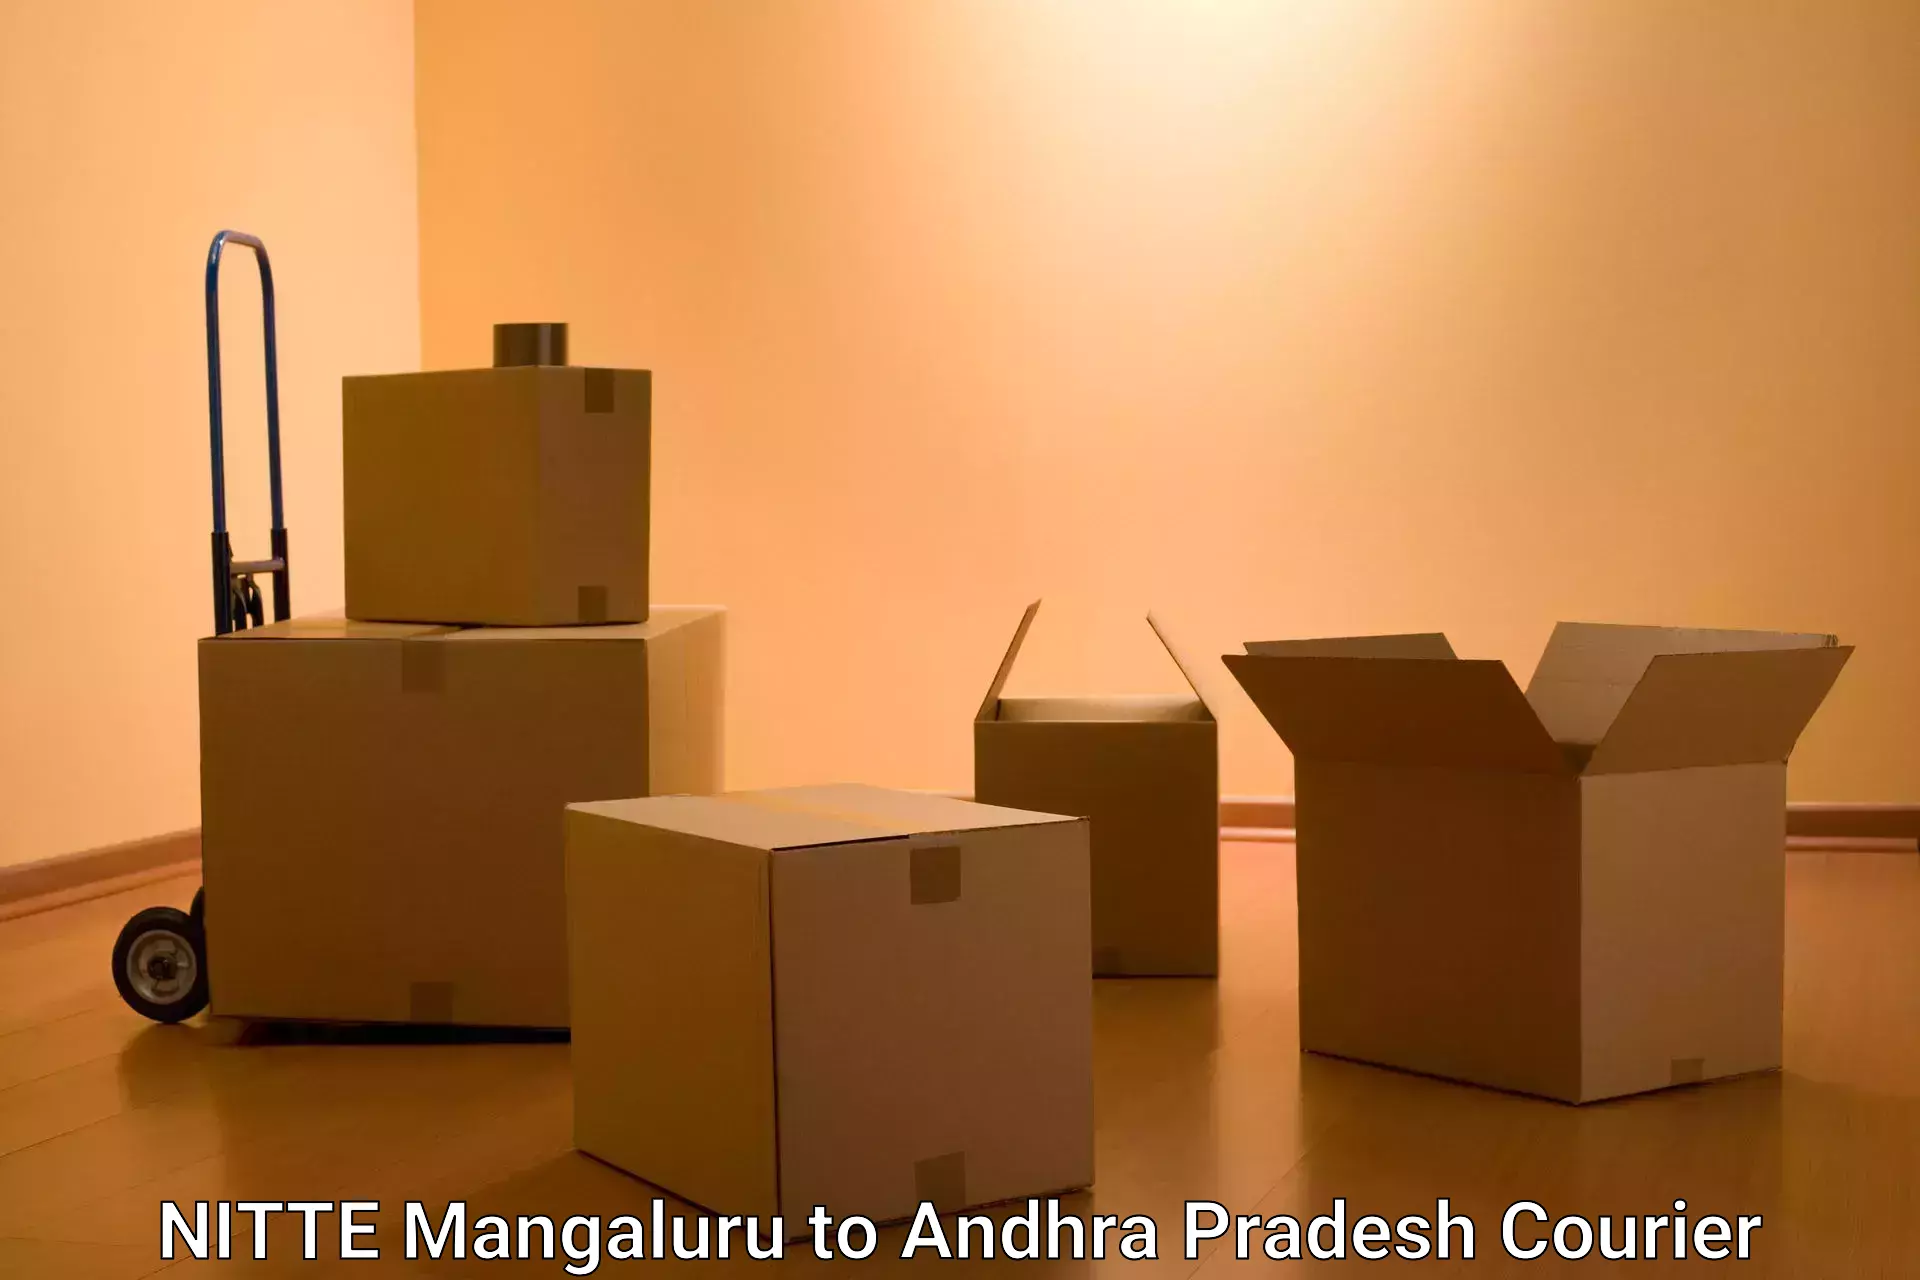 Courier service efficiency in NITTE Mangaluru to Chilakaluripet